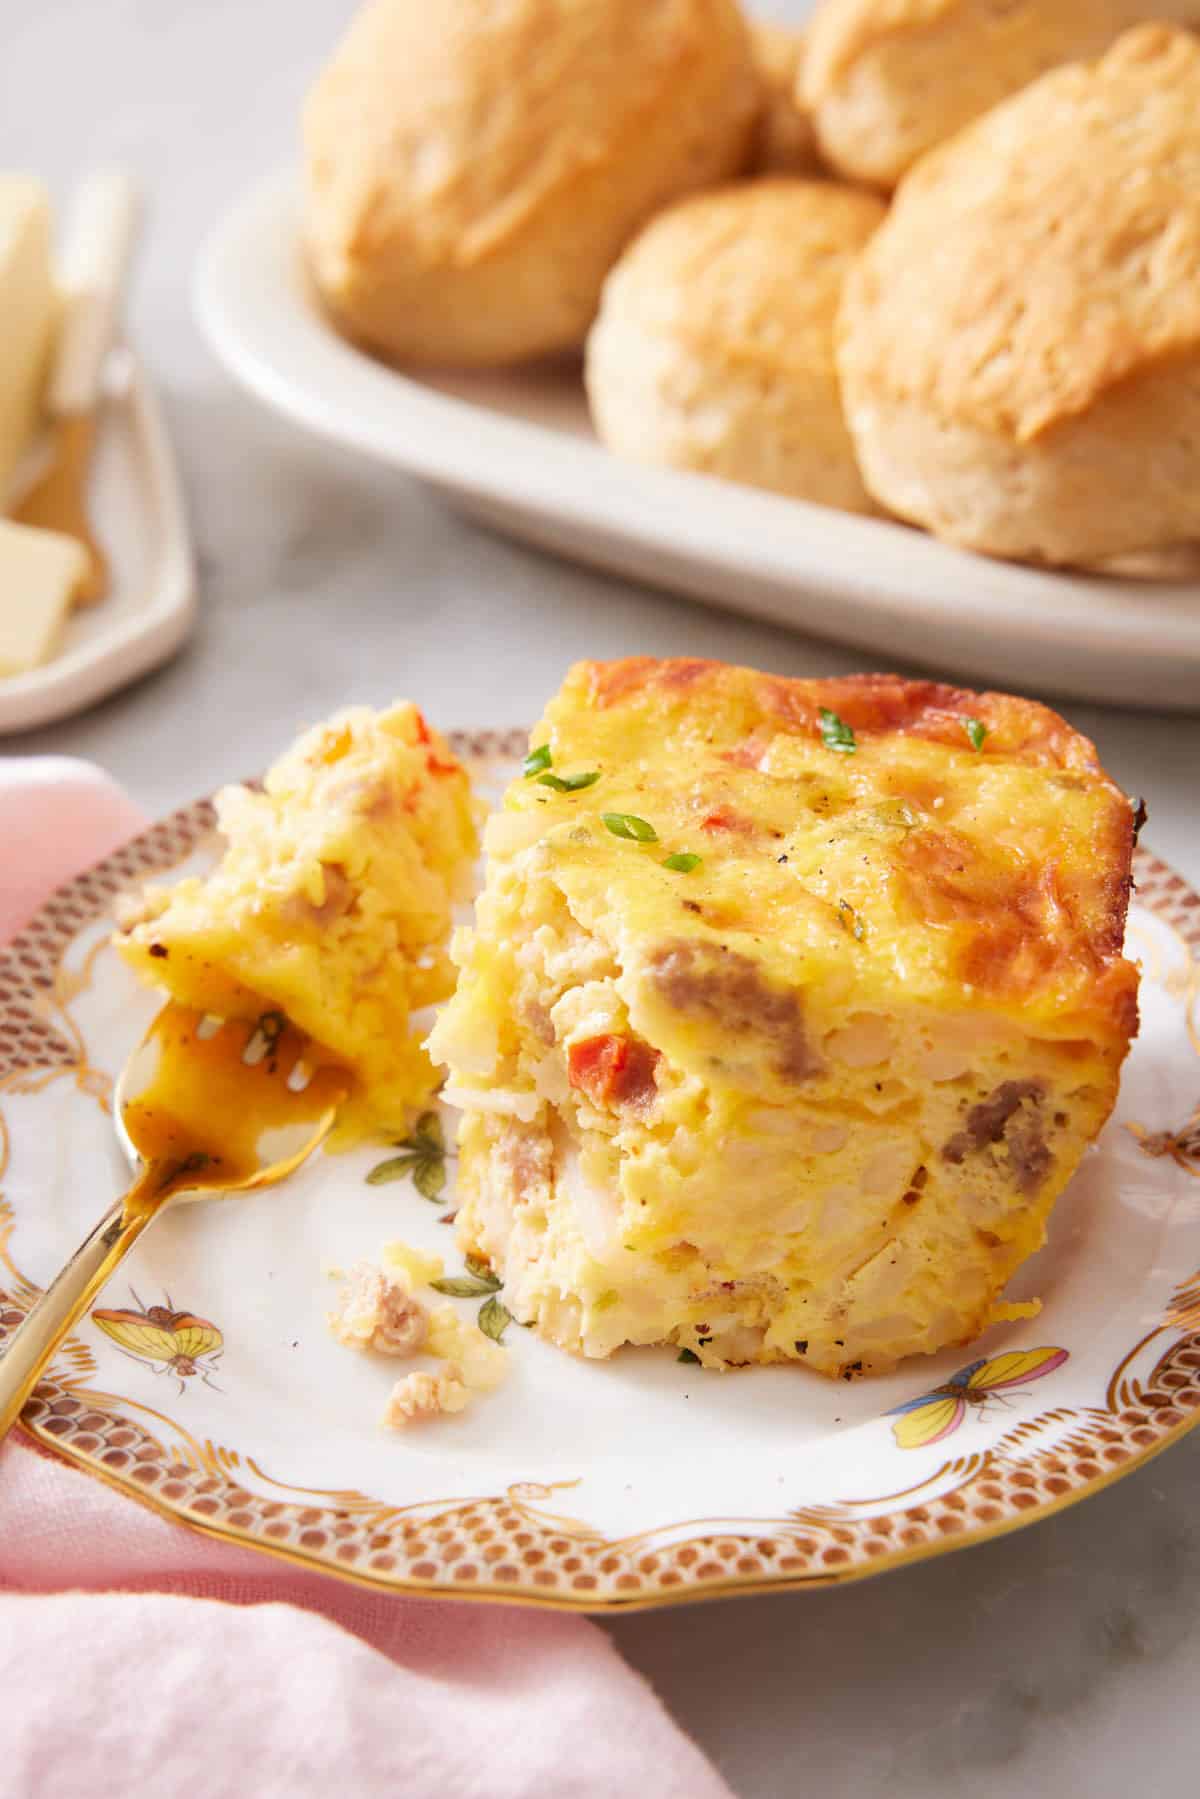 A plate with a piece of breakfast casserole with a bite on a fork.